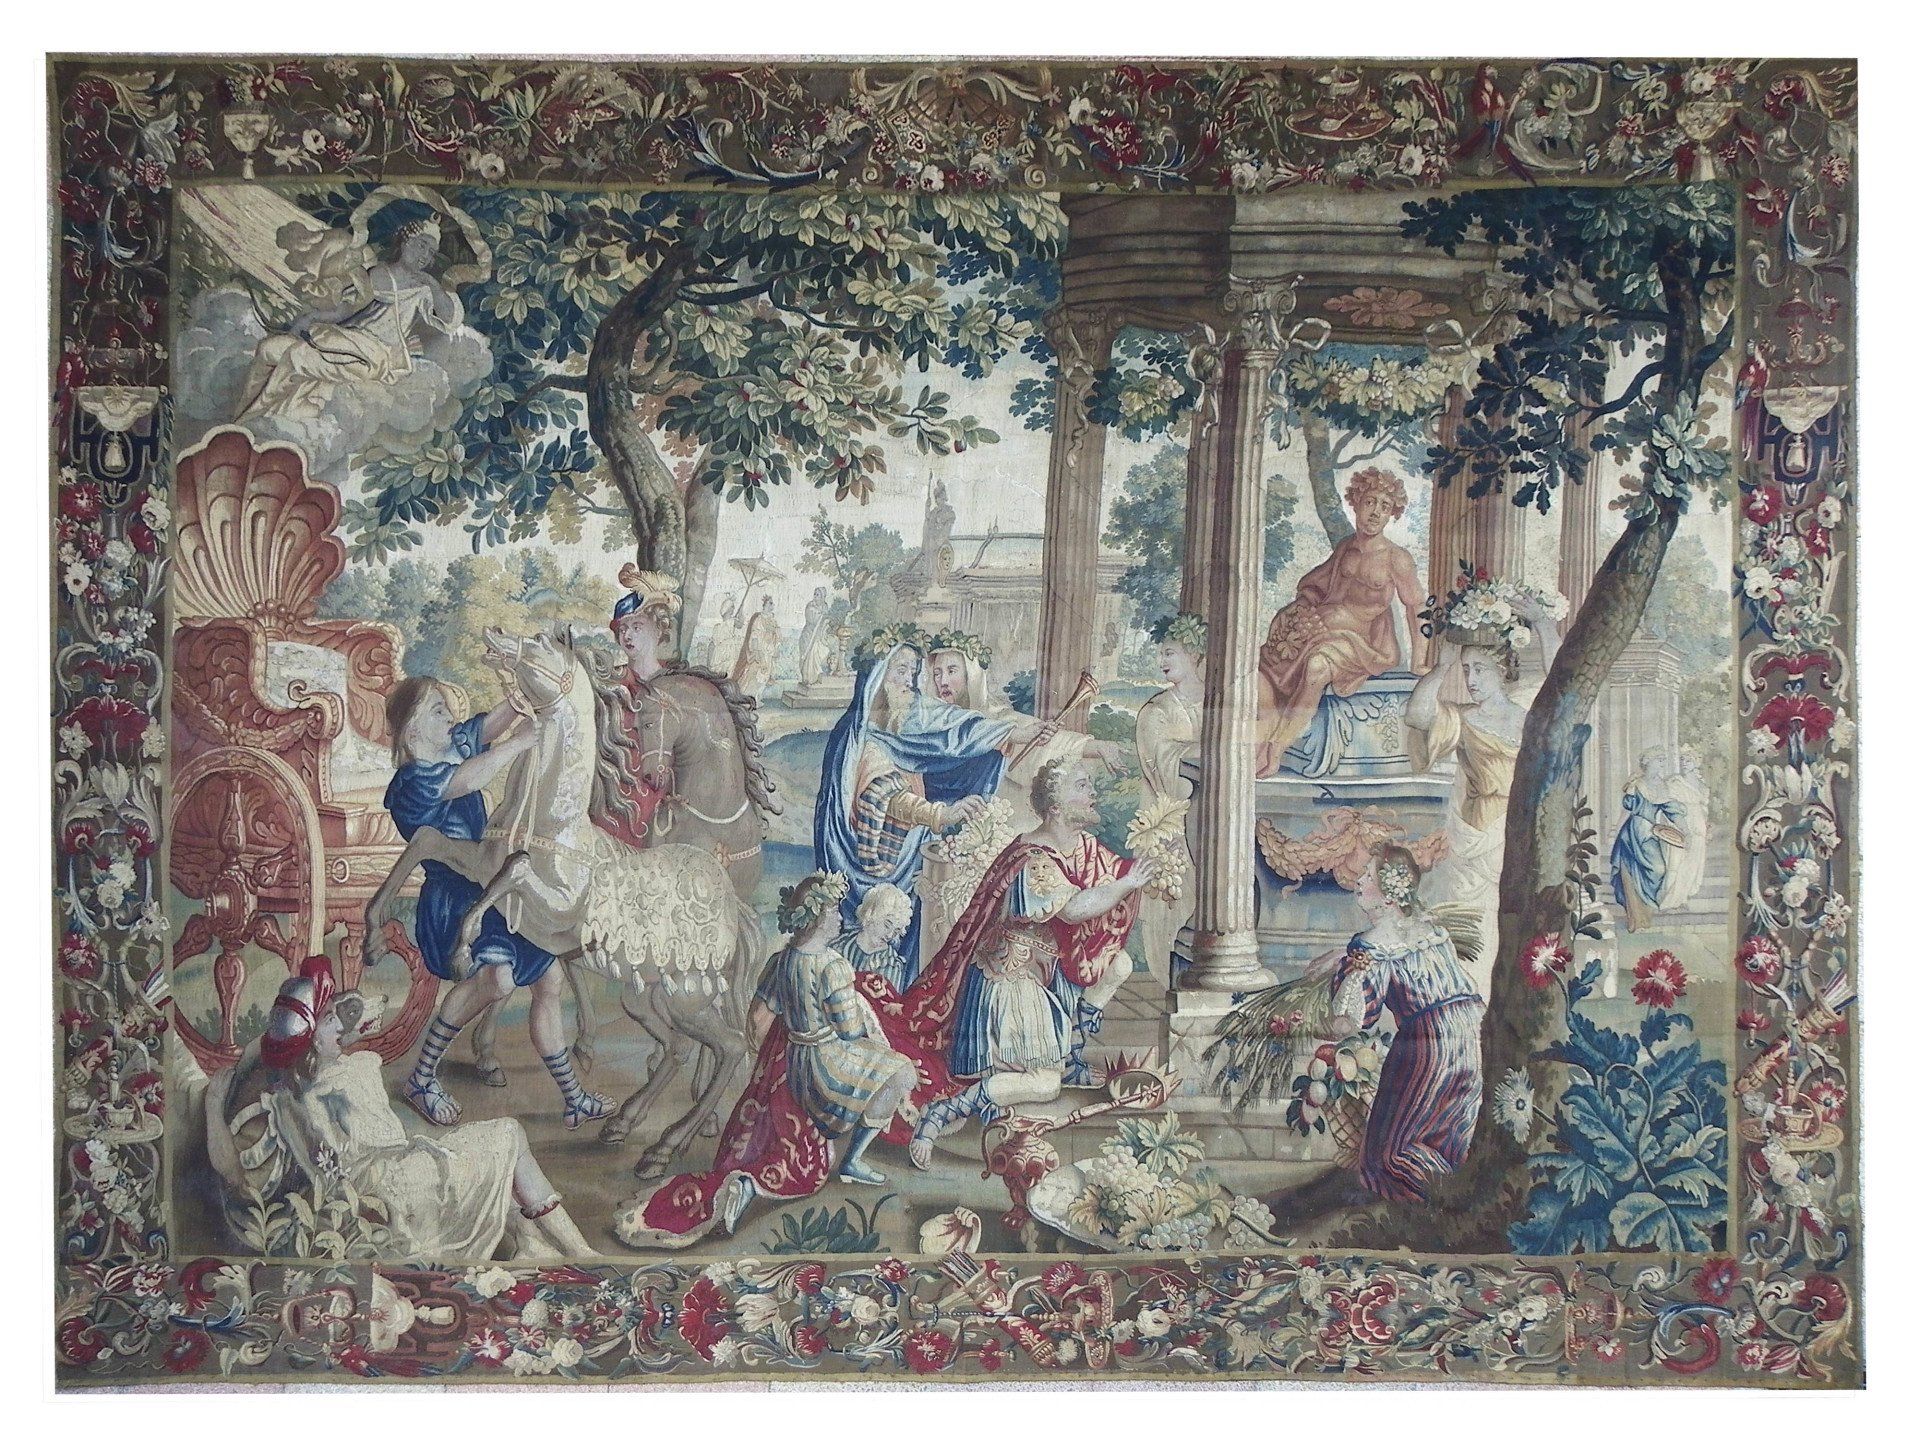 Photo of the 17th century Brussels Tapestry - Le Roi Œnée, Collection Galerie Jabert